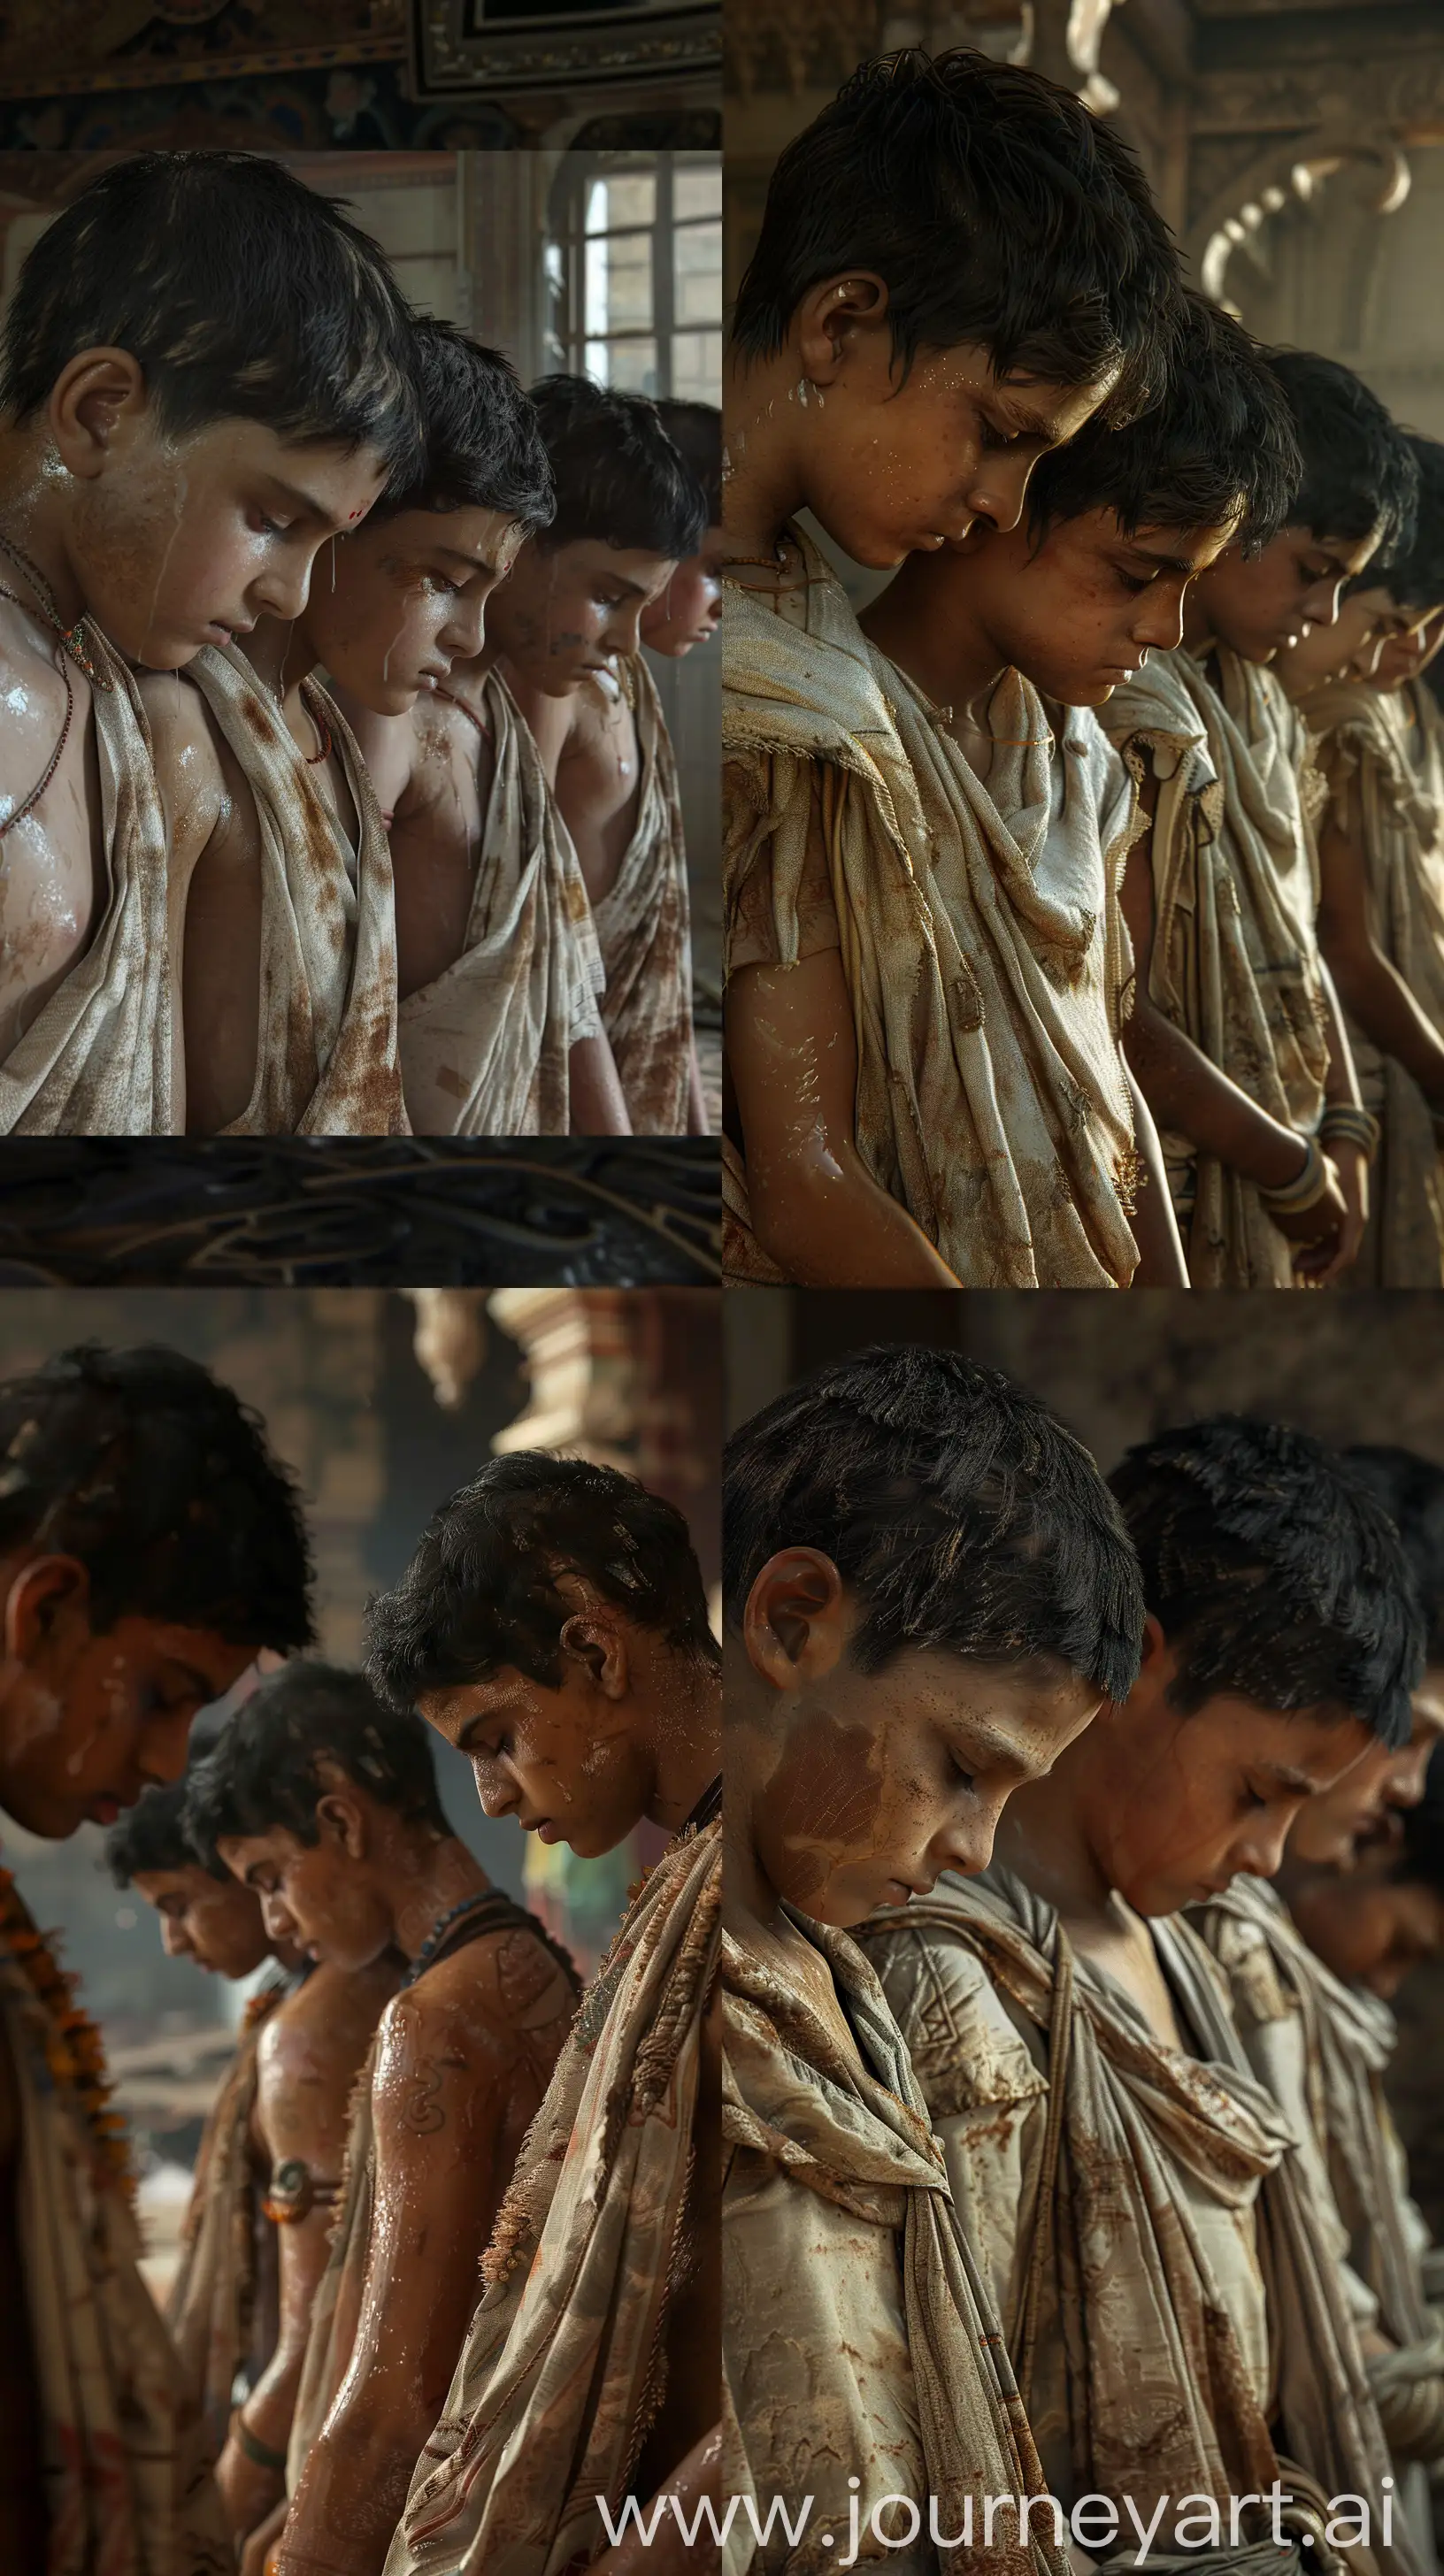 Hyper realistic image of 4 Indian boys from ancient times, in simple shabby clothes, around the age of 15, all standing with their heads bowed down, indoors, close-up image, intricate details, 8k --s 200 --ar 9:16 --v 6